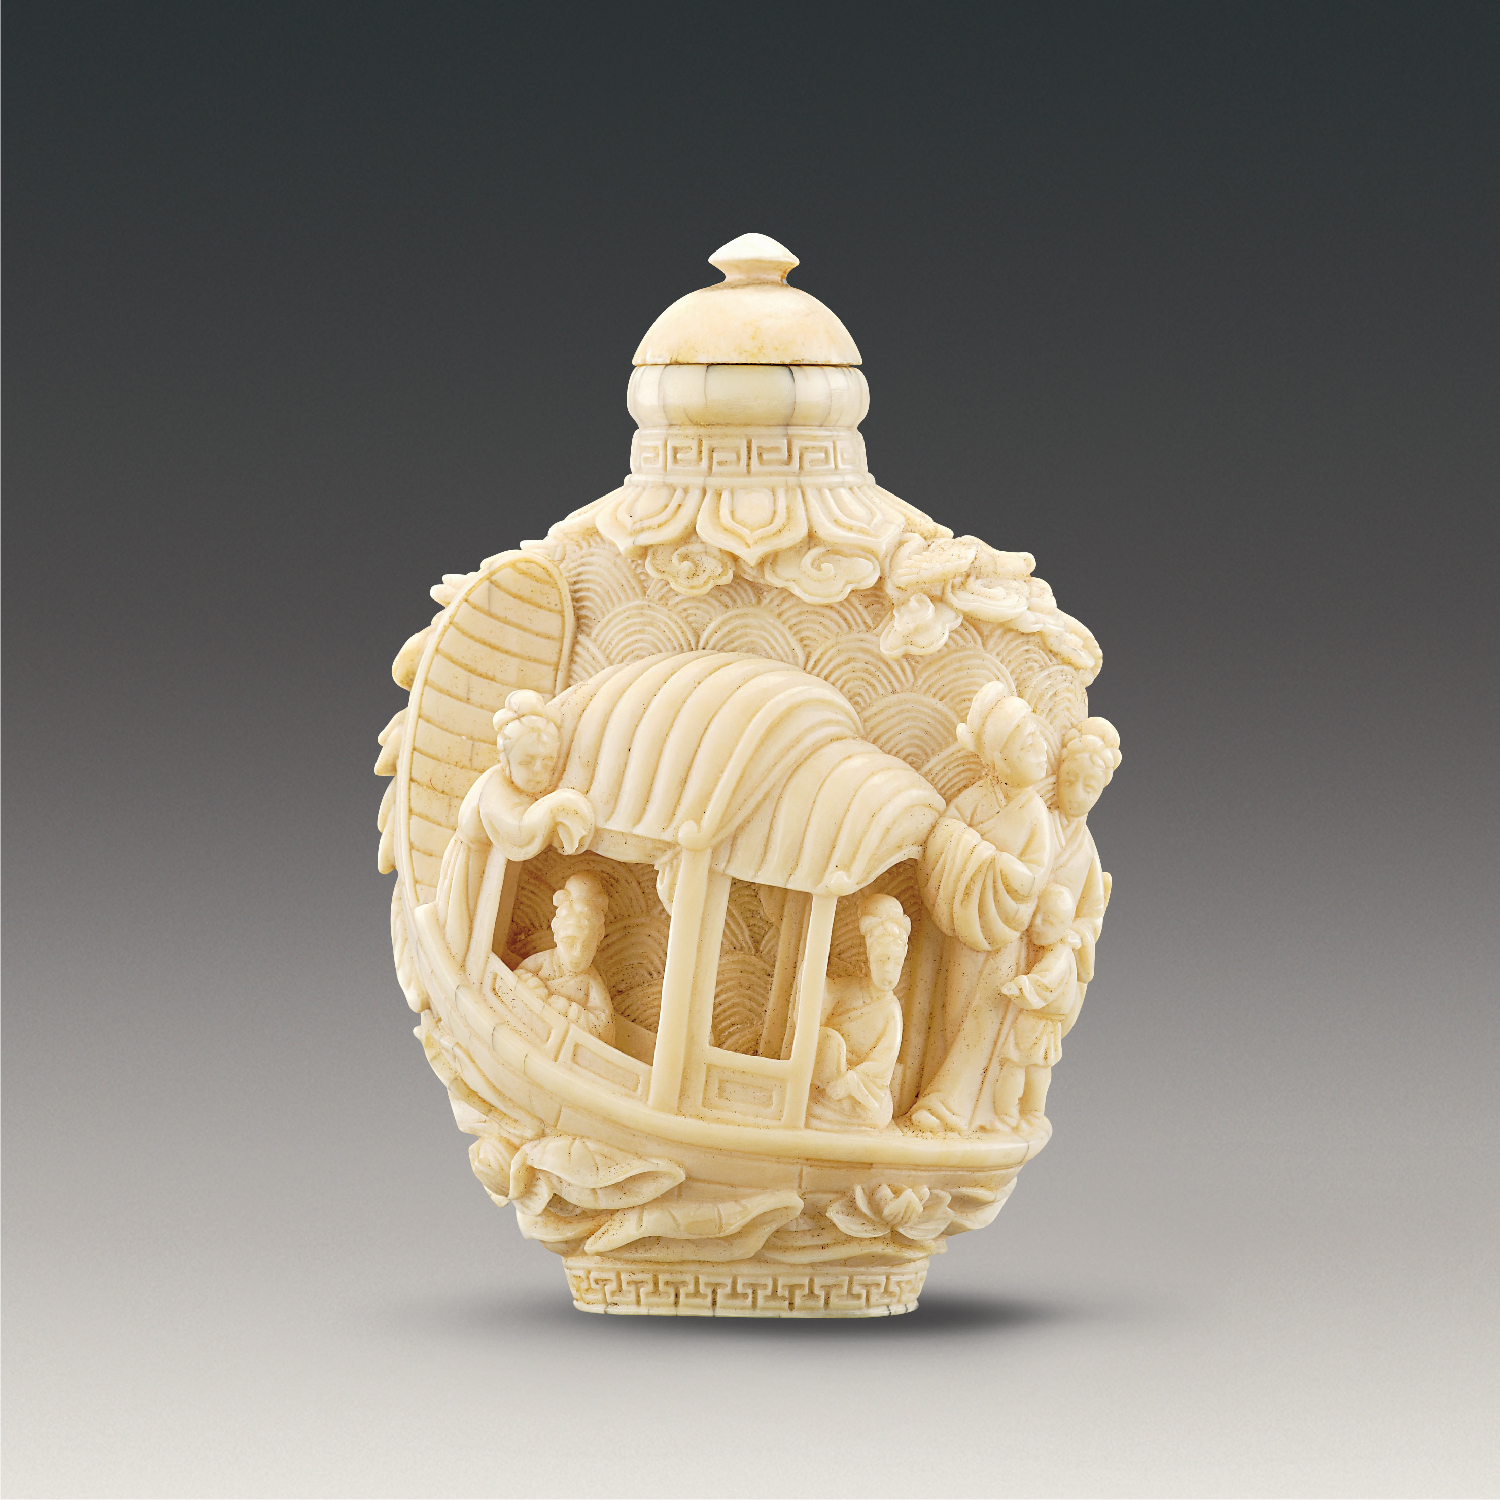 Ivory snuff bottle carved with figures on boat design in openwork